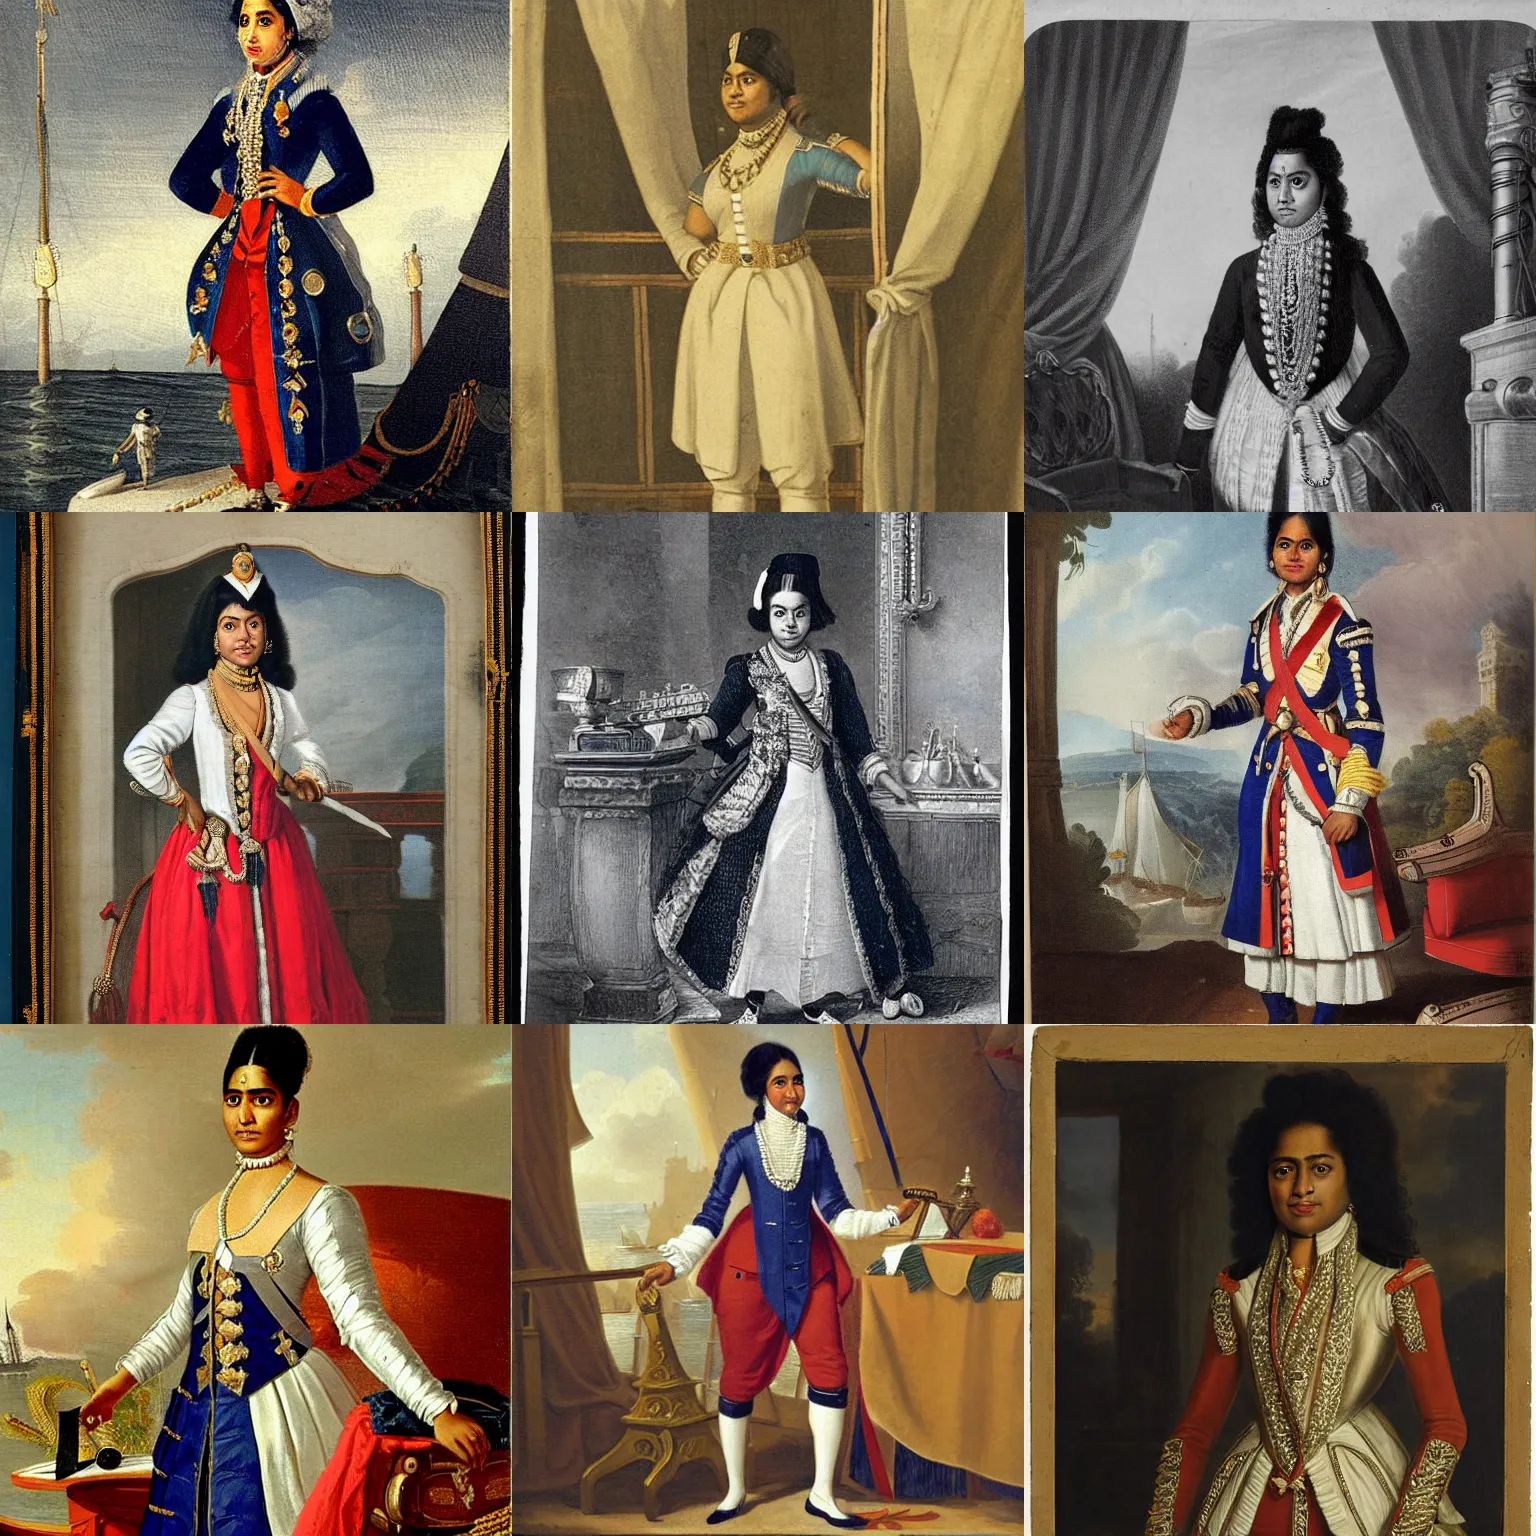 Prompt: A young Indian woman admiral in the Royal Navy, wearing full dress uniform, standing in the cabin of her ship, 18th century